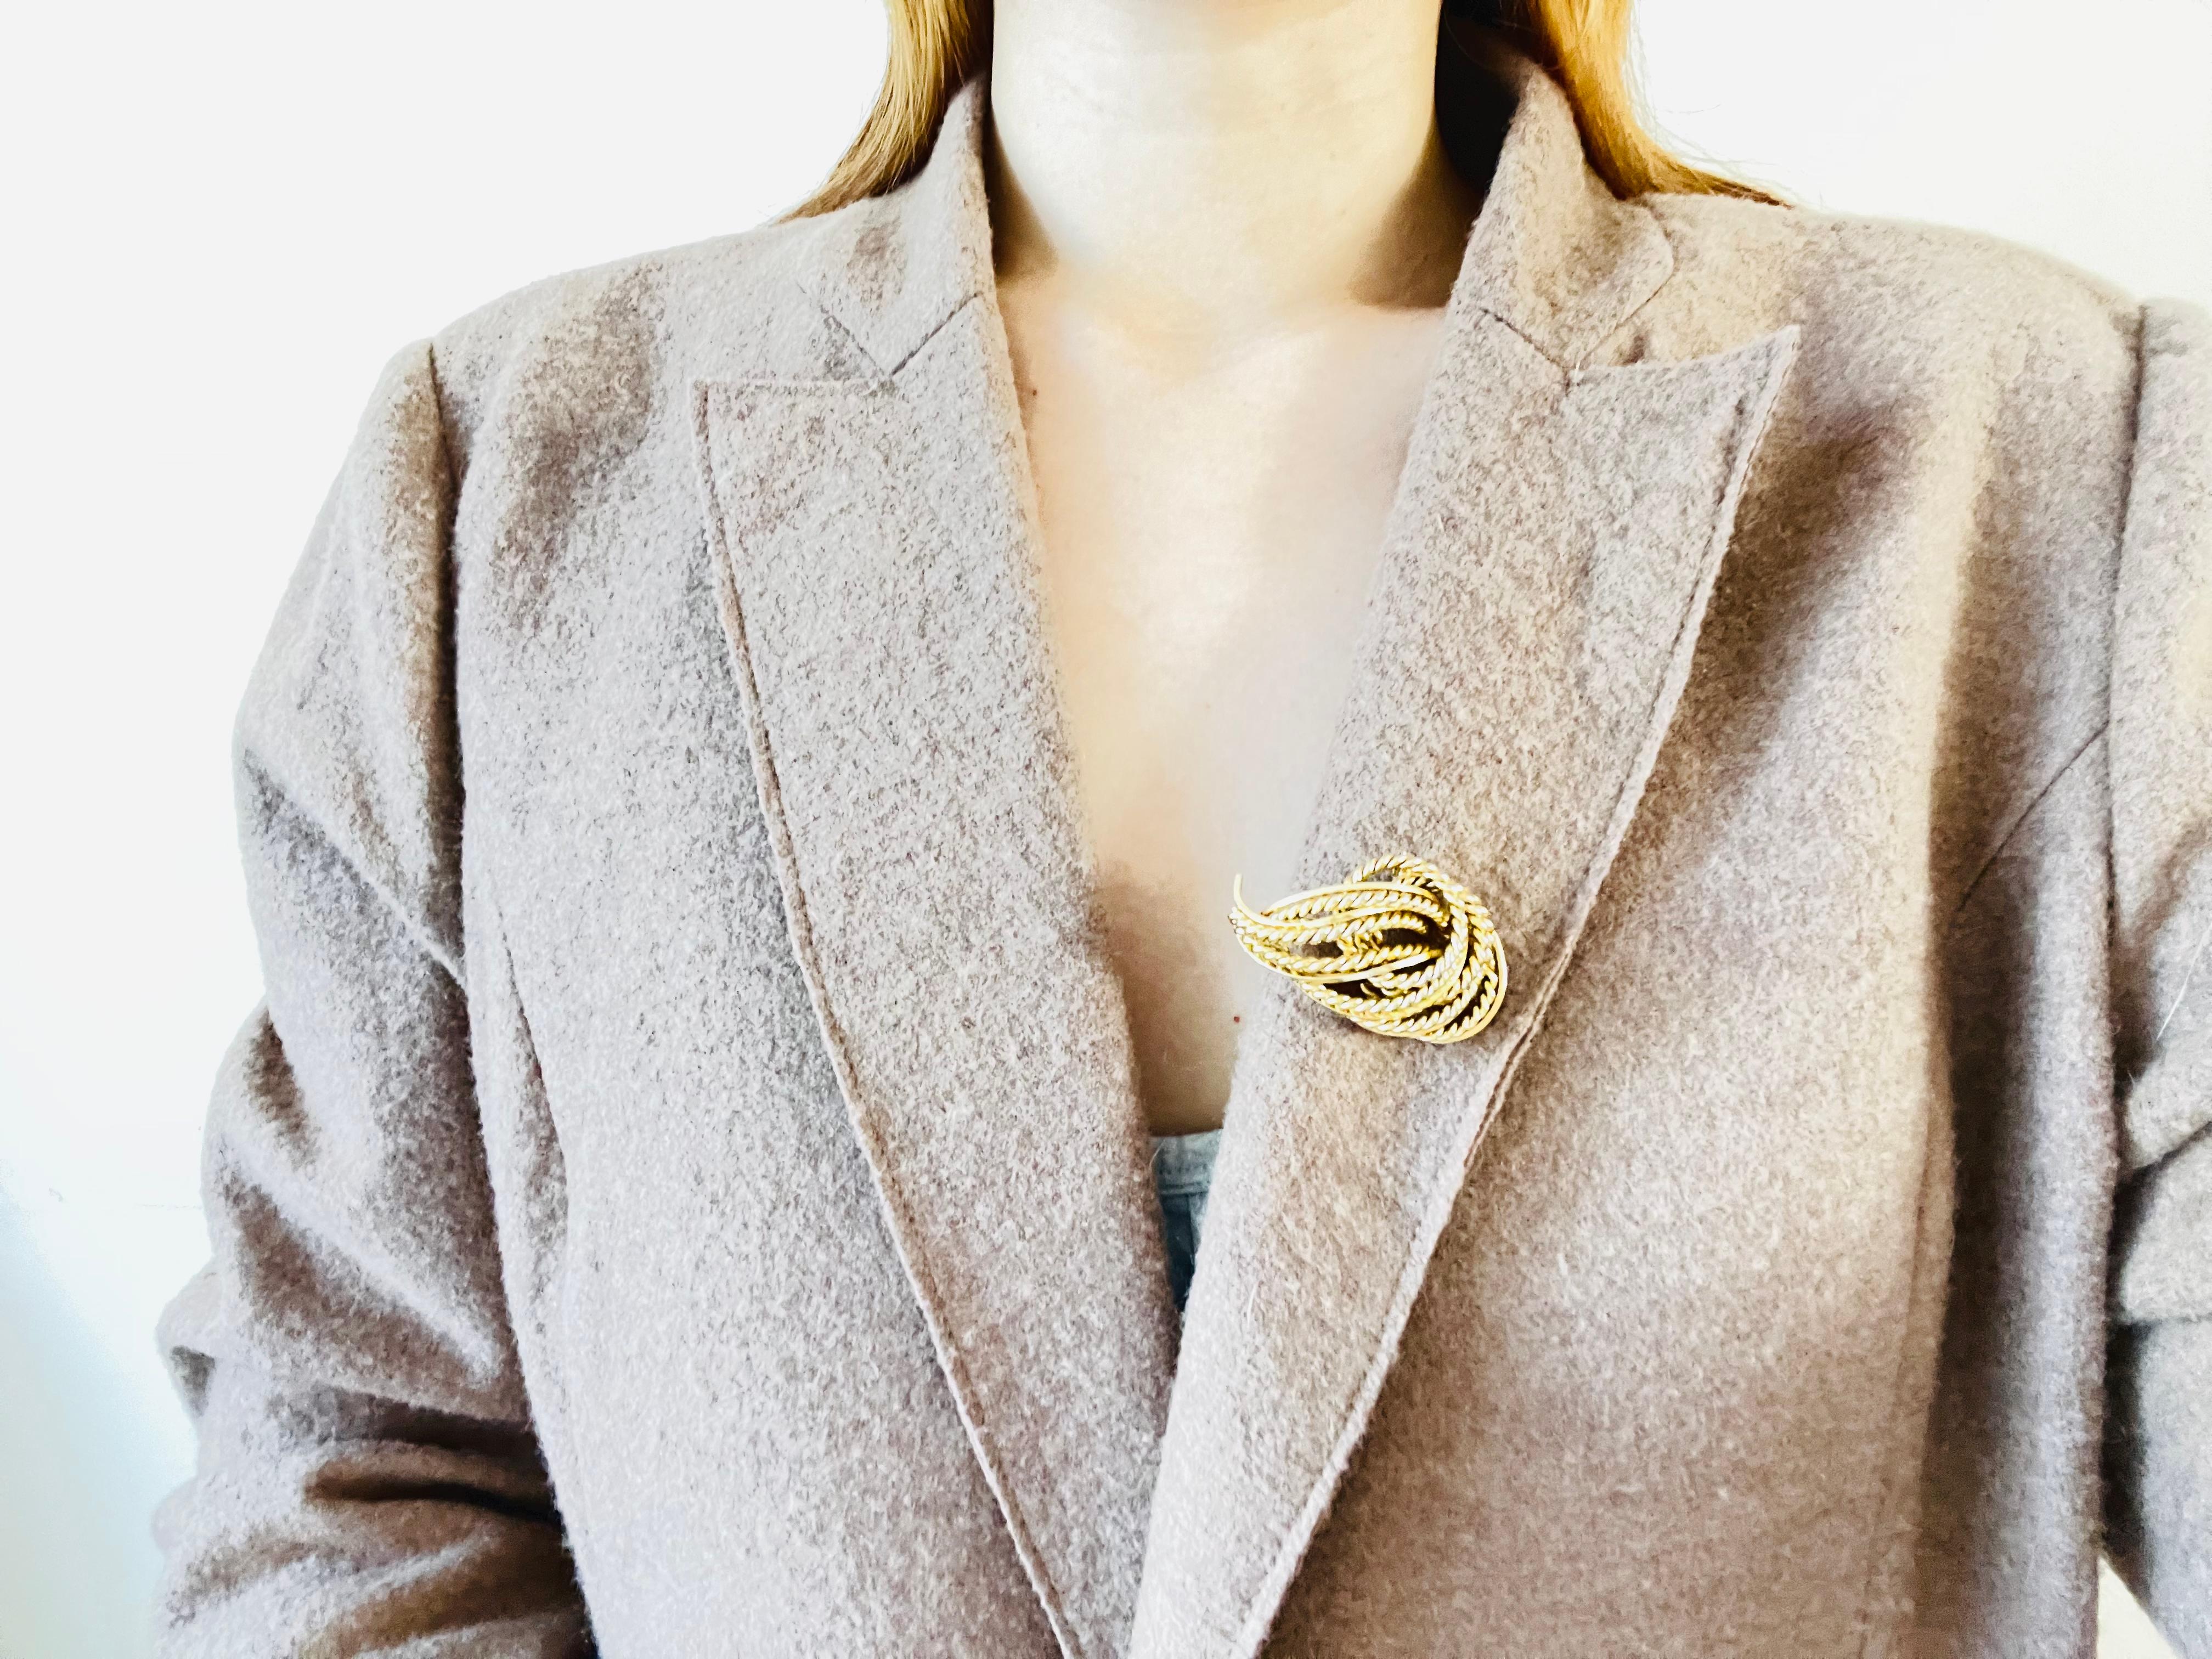 Christian Dior GROSSE 1968 Weave Leaf Modernist Swirl Rope Fire Gold Brooch In Good Condition For Sale In Wokingham, England